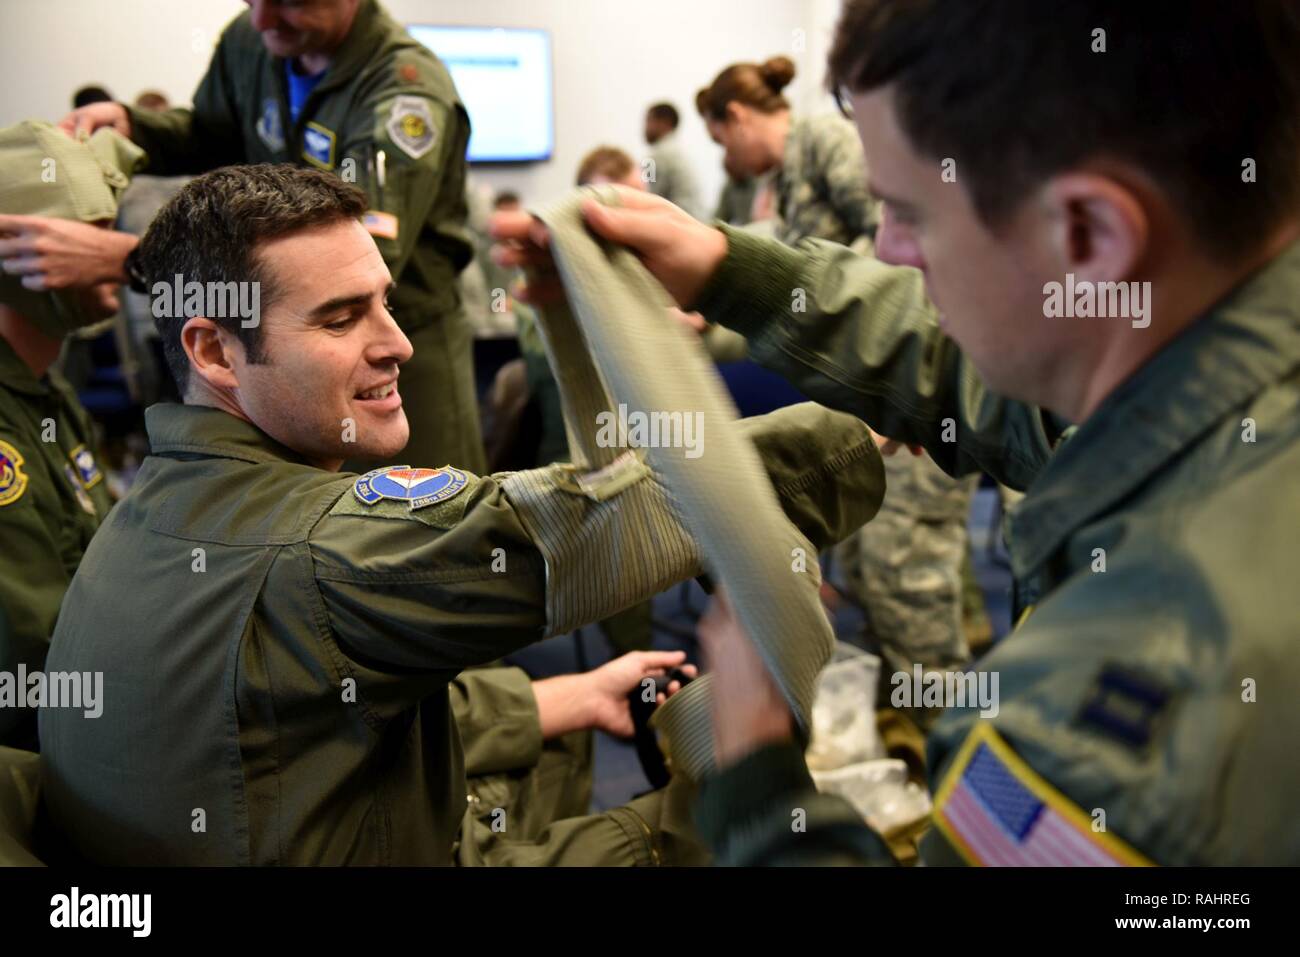 U.S. Air Force Capt. Dan Murnane (right), Master Sgt. Chad Wells (left), 145th Airlift Wing, demonstrate how to wrap an injured arm during an Air Expeditionary Skills Rodeo held in a hangar at the North Carolina Air National Guard Base, Charlotte Douglas International Airport, Feb. 4, 2017. The demonstration is part of training for pre-deploying Airmen on self-aid buddy care. Stock Photo